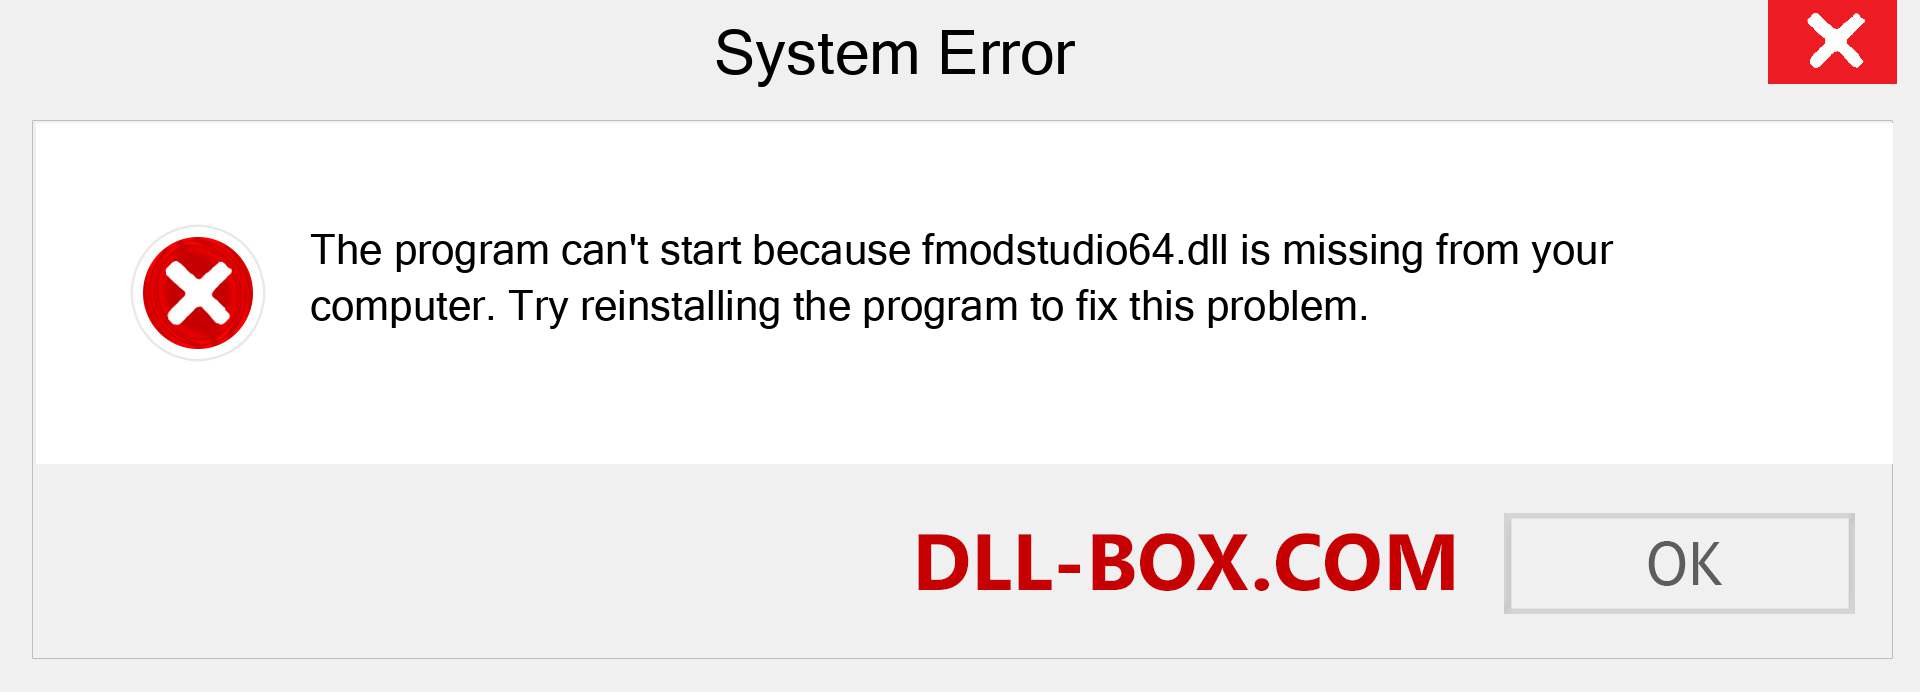  fmodstudio64.dll file is missing?. Download for Windows 7, 8, 10 - Fix  fmodstudio64 dll Missing Error on Windows, photos, images